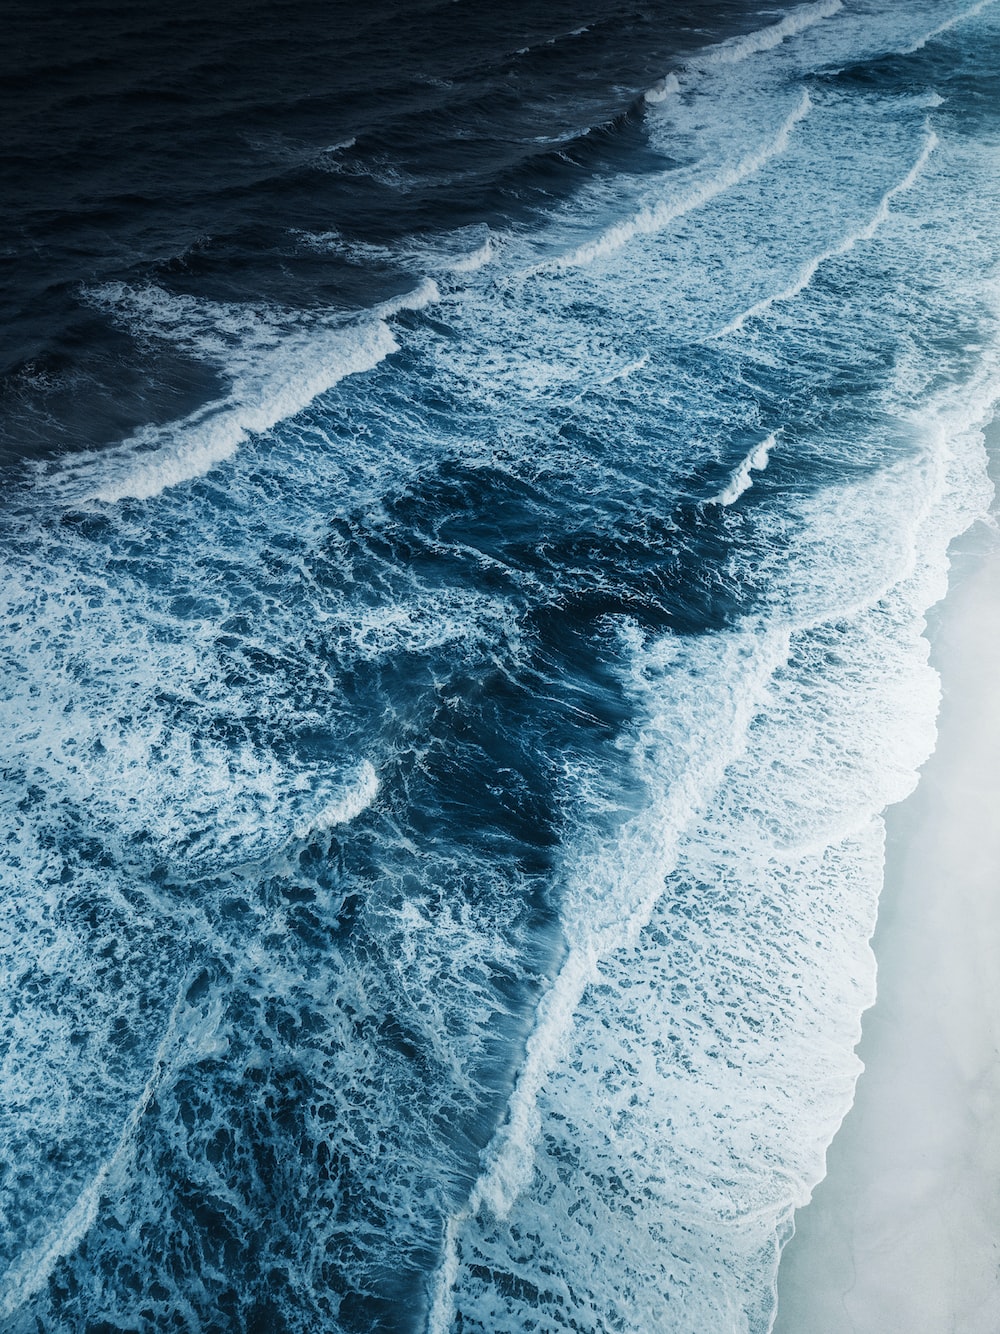 An aerial view of the ocean with waves photo â free australia image on